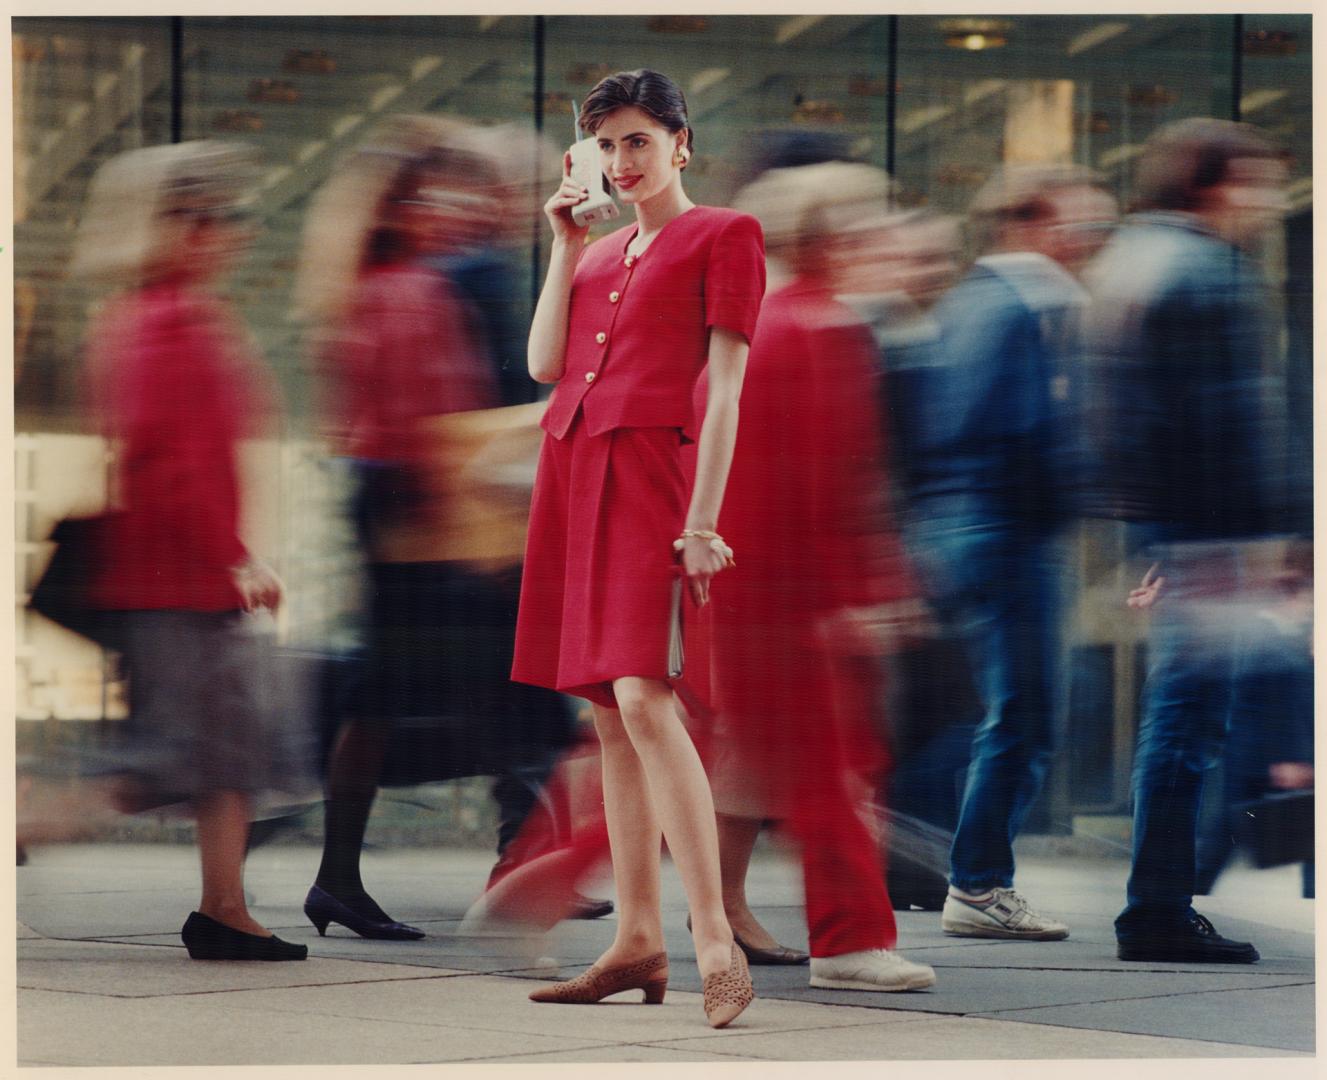 Right, red linen jacket, $250, and shorts, $135, by ports International, available at Ports International shops